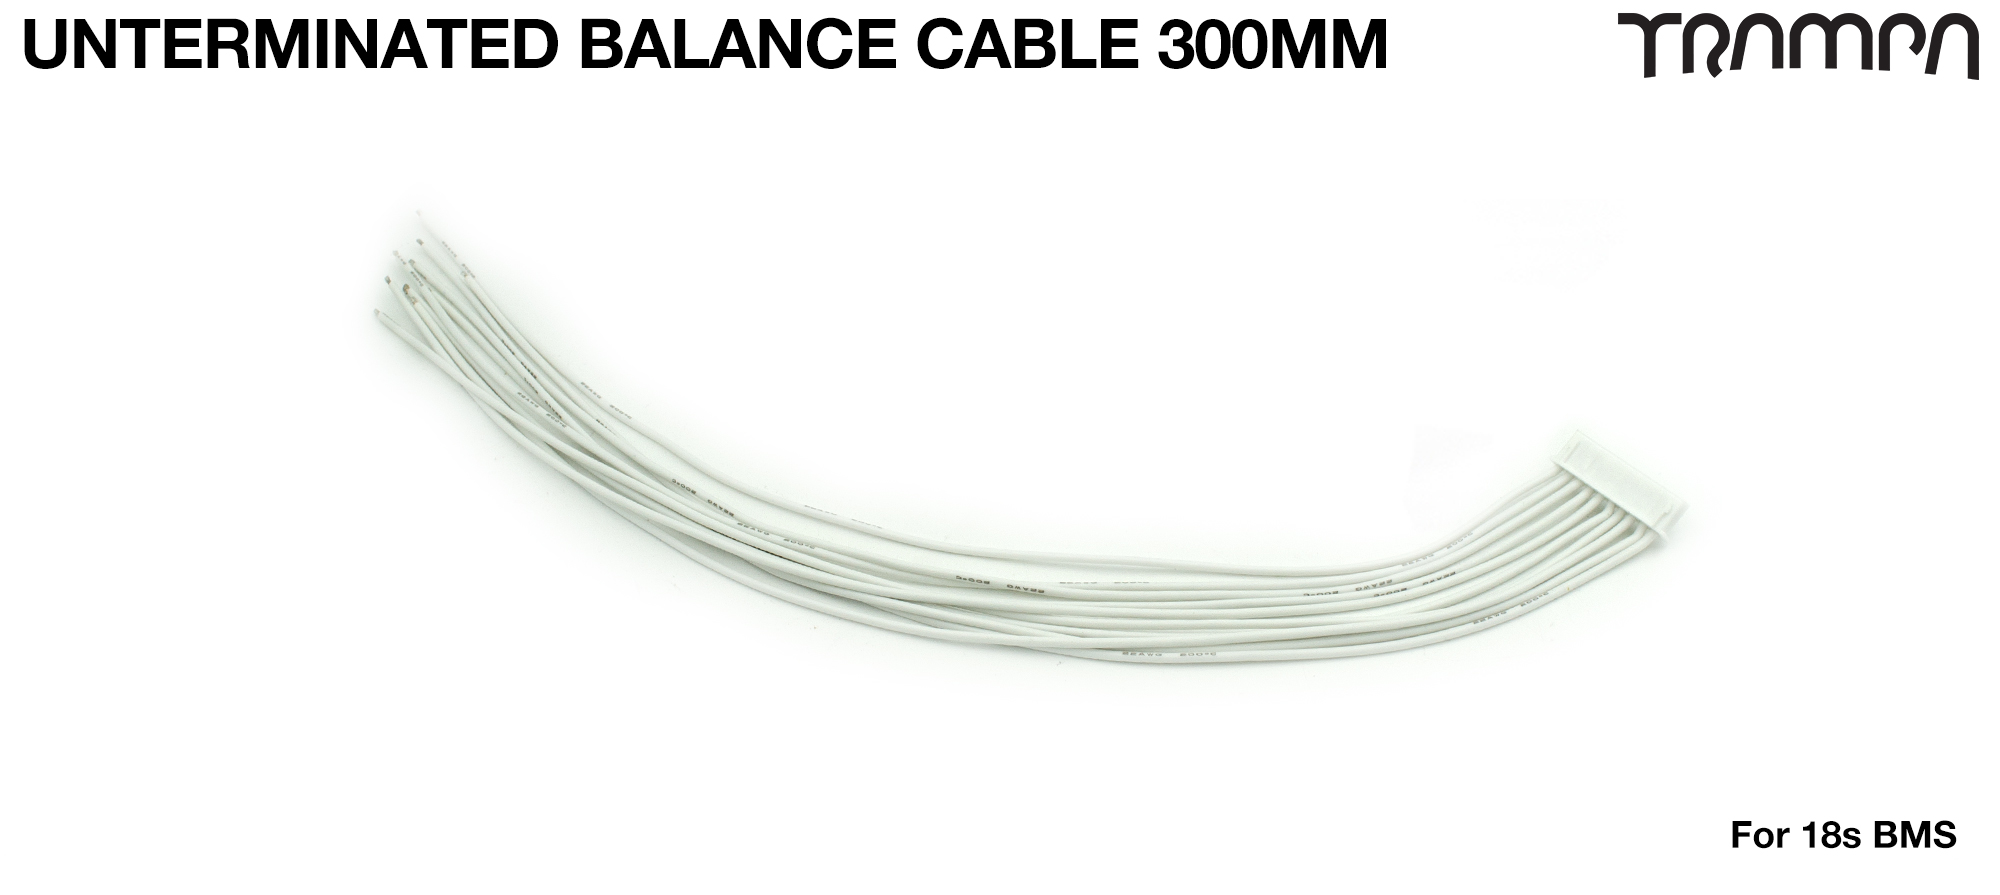 UN-Terminated Balance cable 300mm